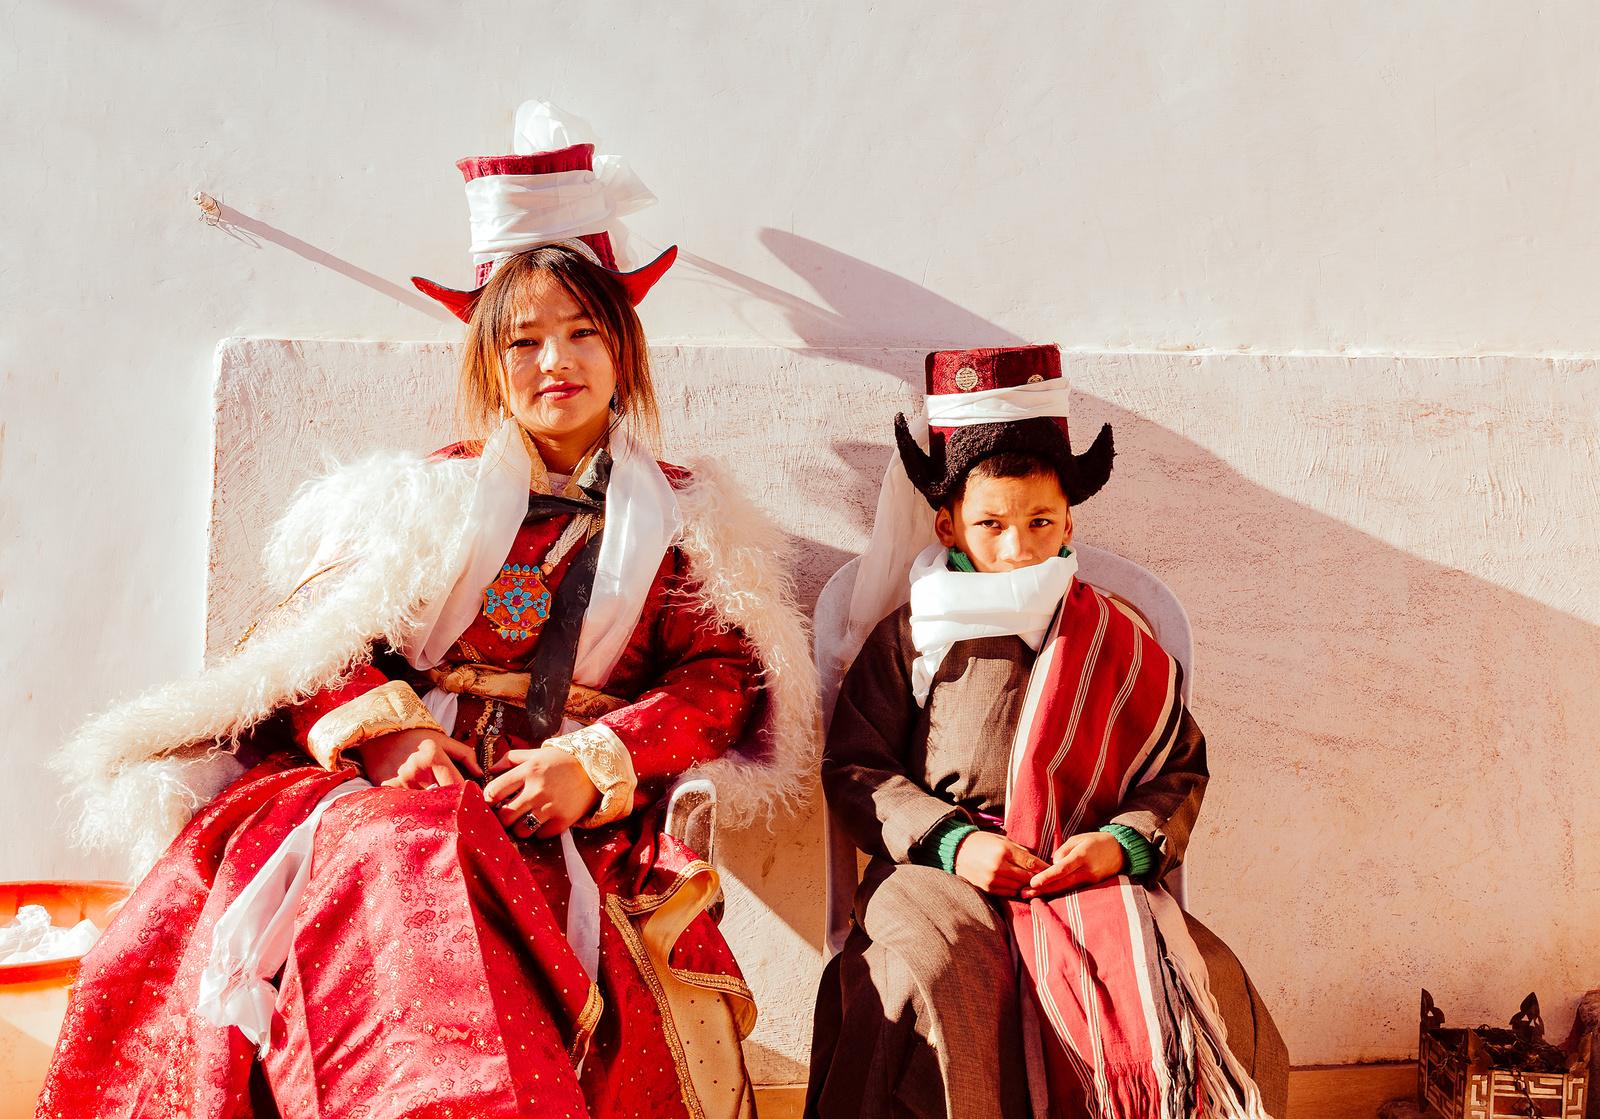 A Bride and her younger&nbs...hi &nbsp;Monastery - Ladakh